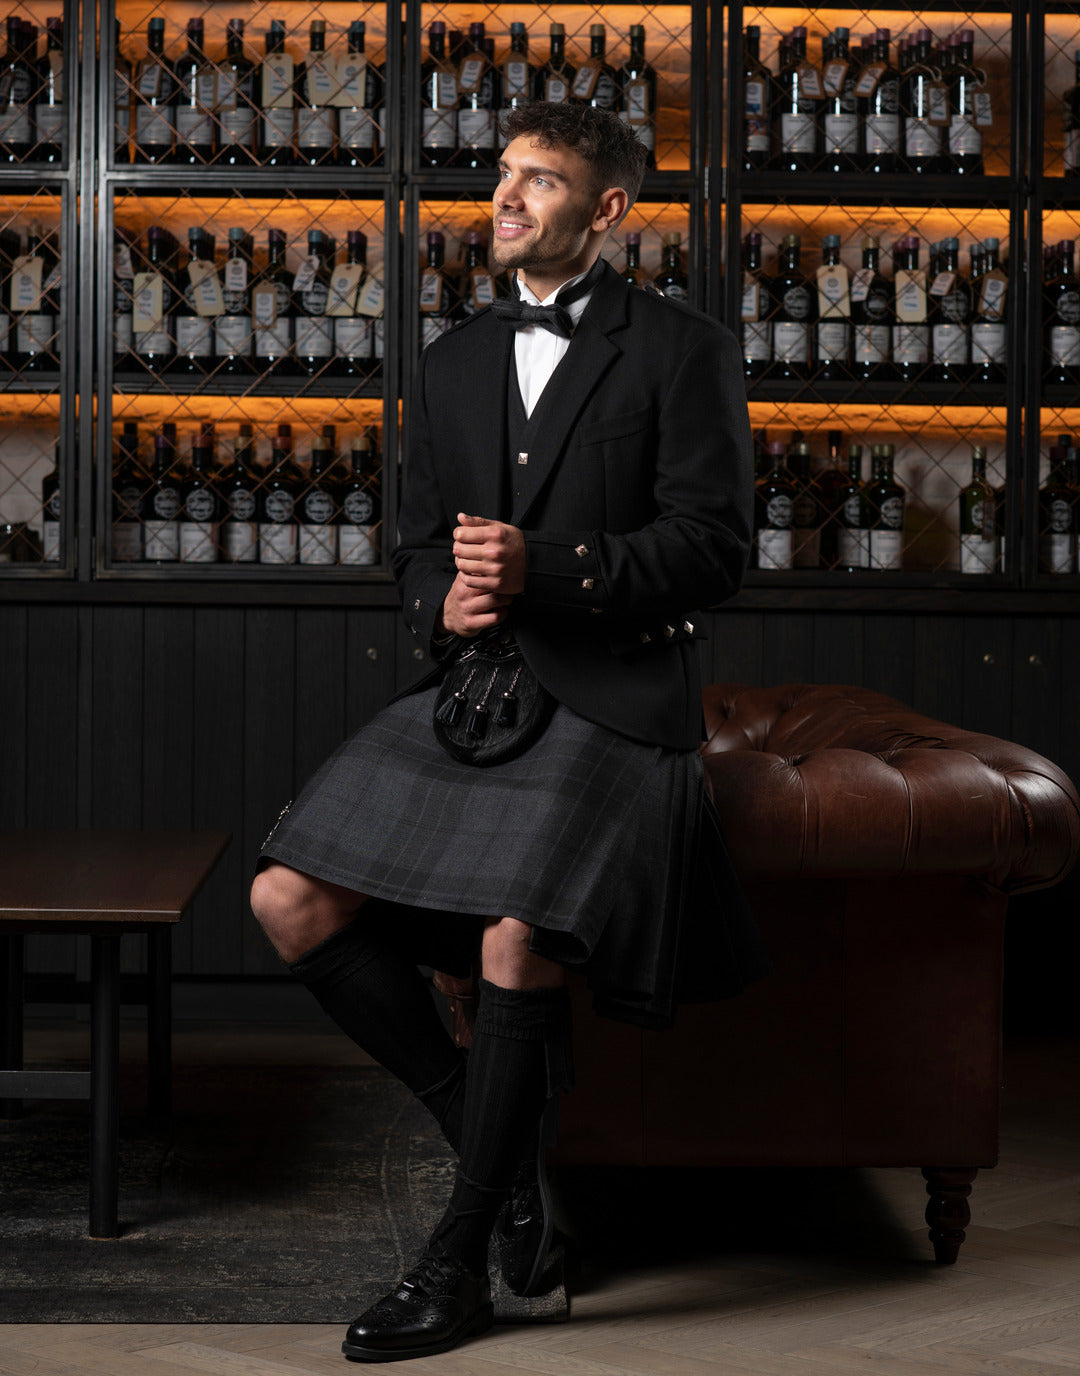 Kilt outfit with bow tie